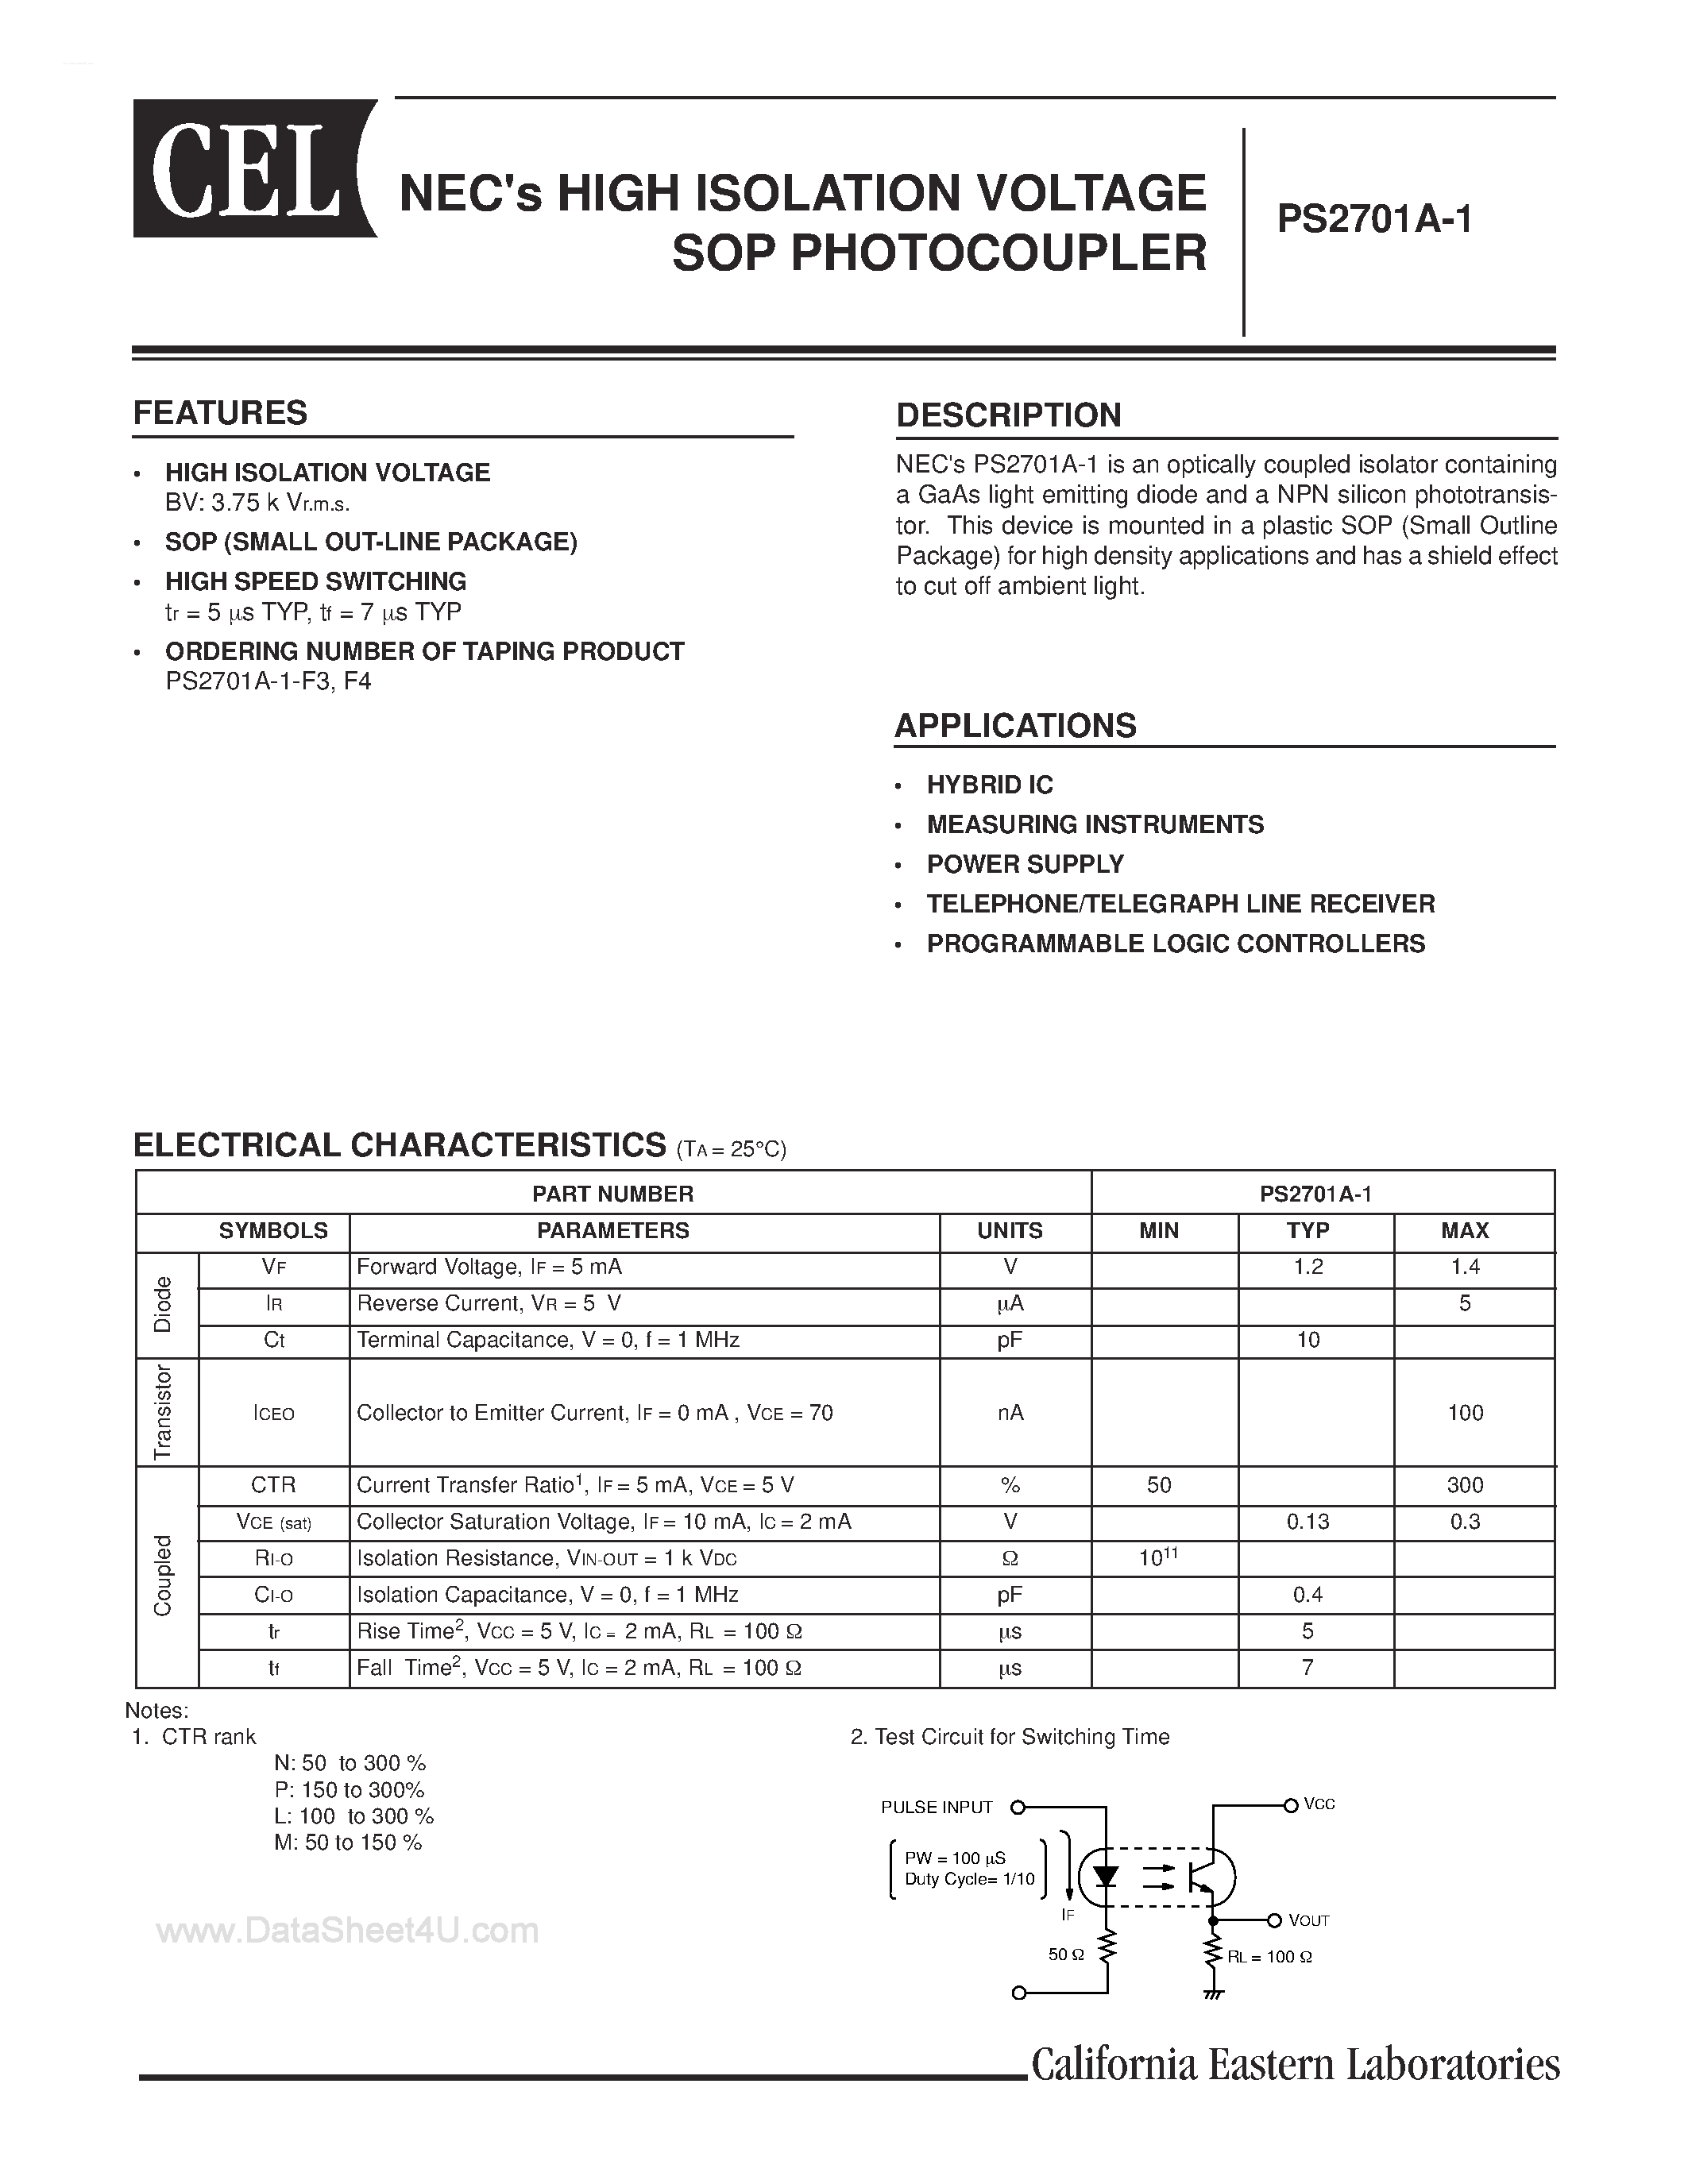 Datasheet PS2701A-1-V-F3 - NEC is HIGH ISOLATION VOLTAGE SOP PHOTOCOUPLER page 1